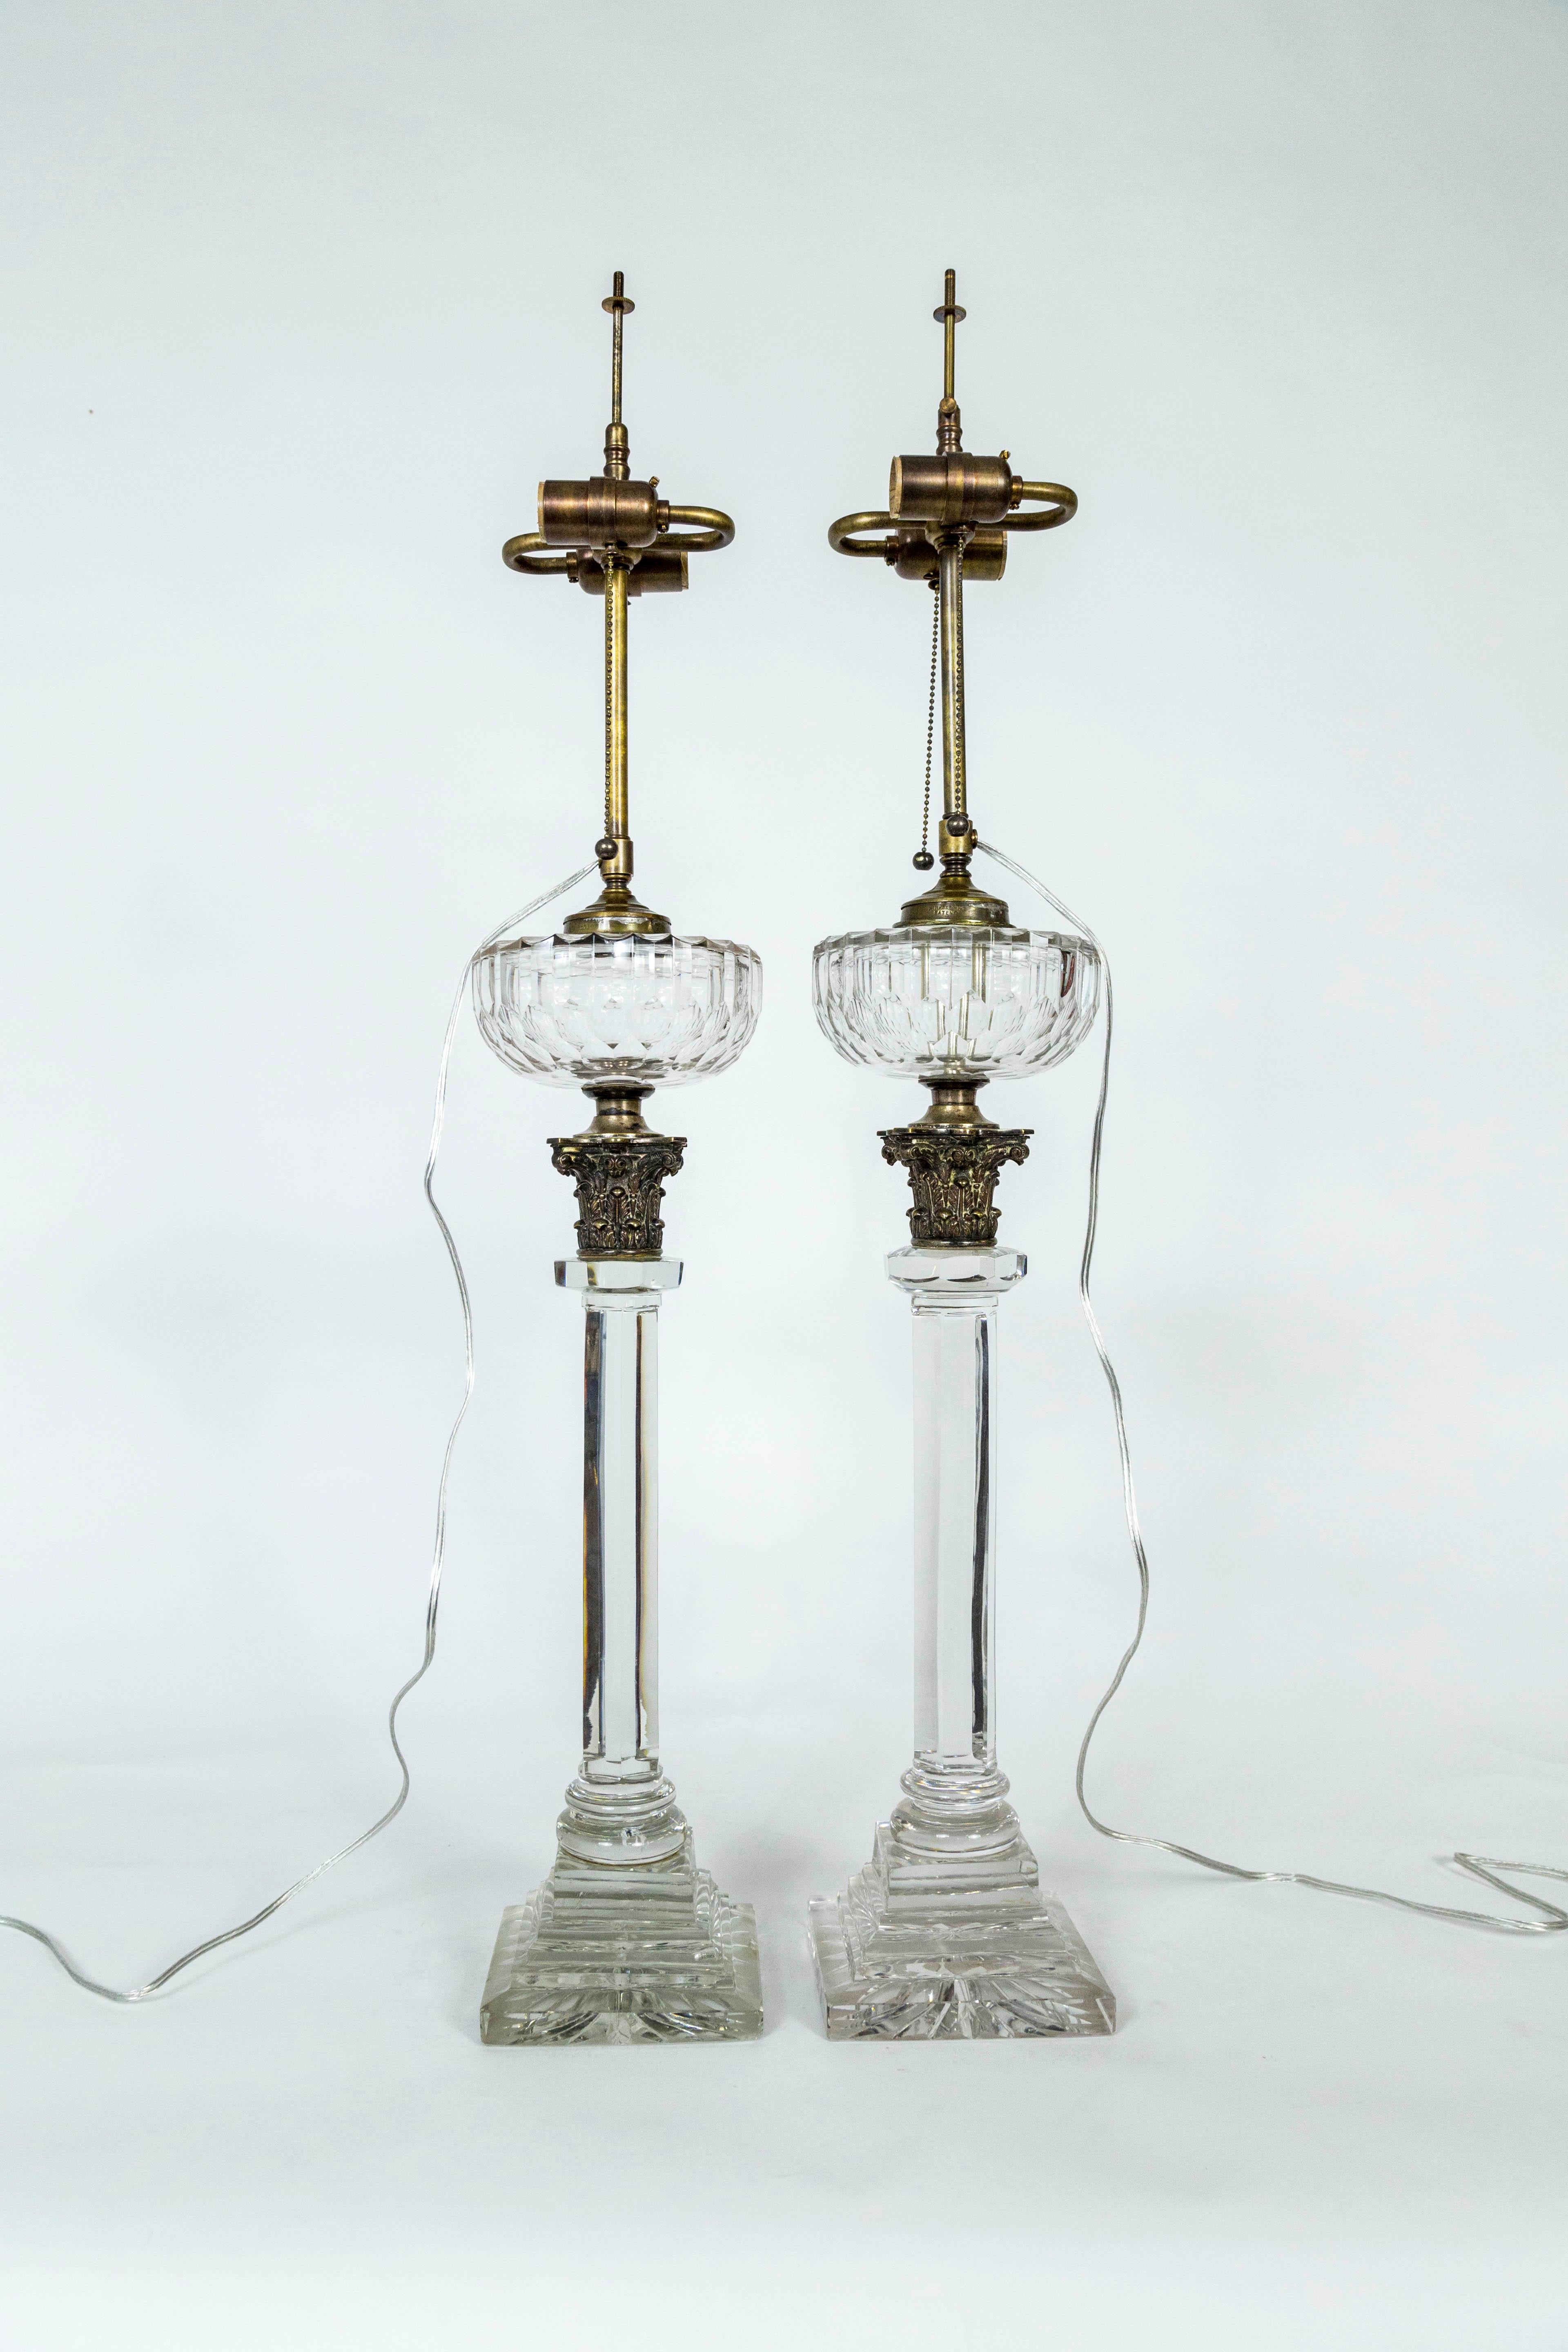 A pair of electrified former oil lamps in solid crystal columns with bronze, corinthian capitals. Cut crystal details and neoclassical elements, with brass hardware, double sockets, and pull chains; newly wired. Hinks & Sons patent, mid-19th